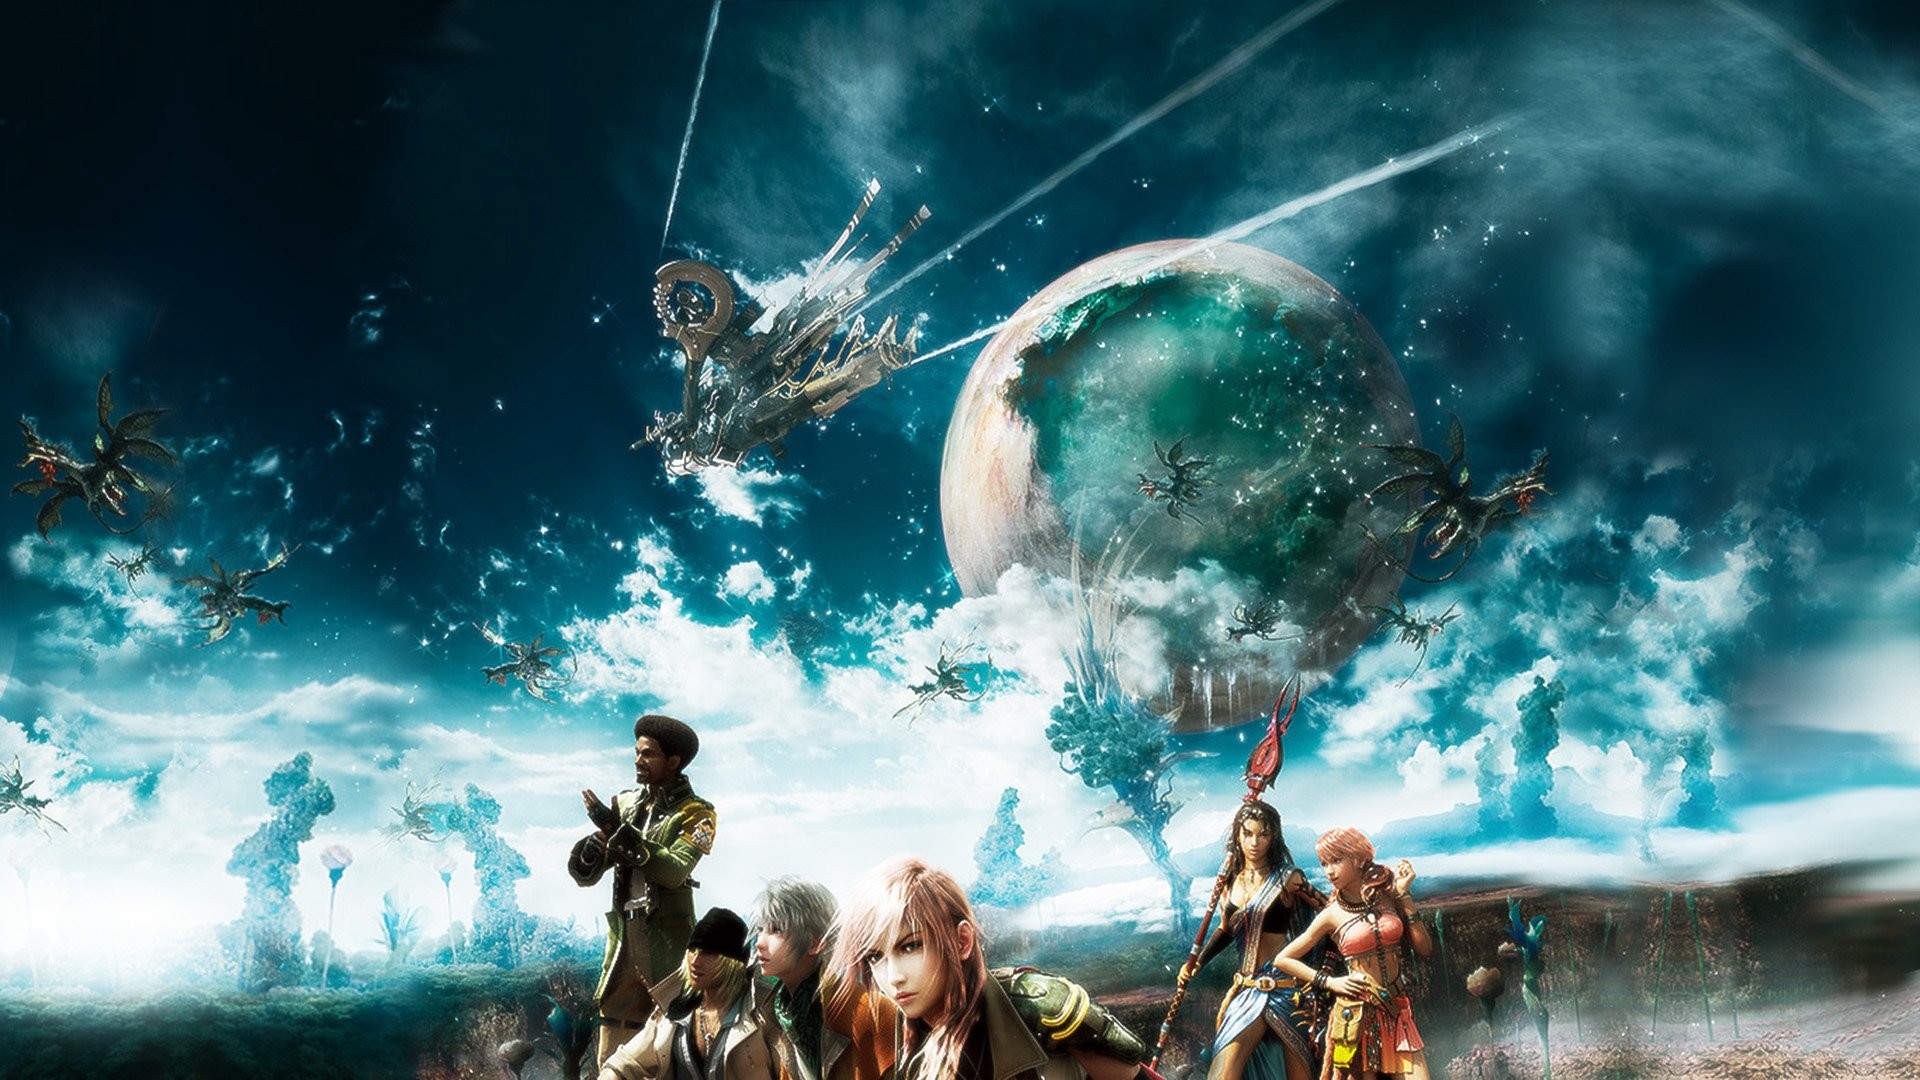 1920x1080 Final Fantasy Xiii Poster